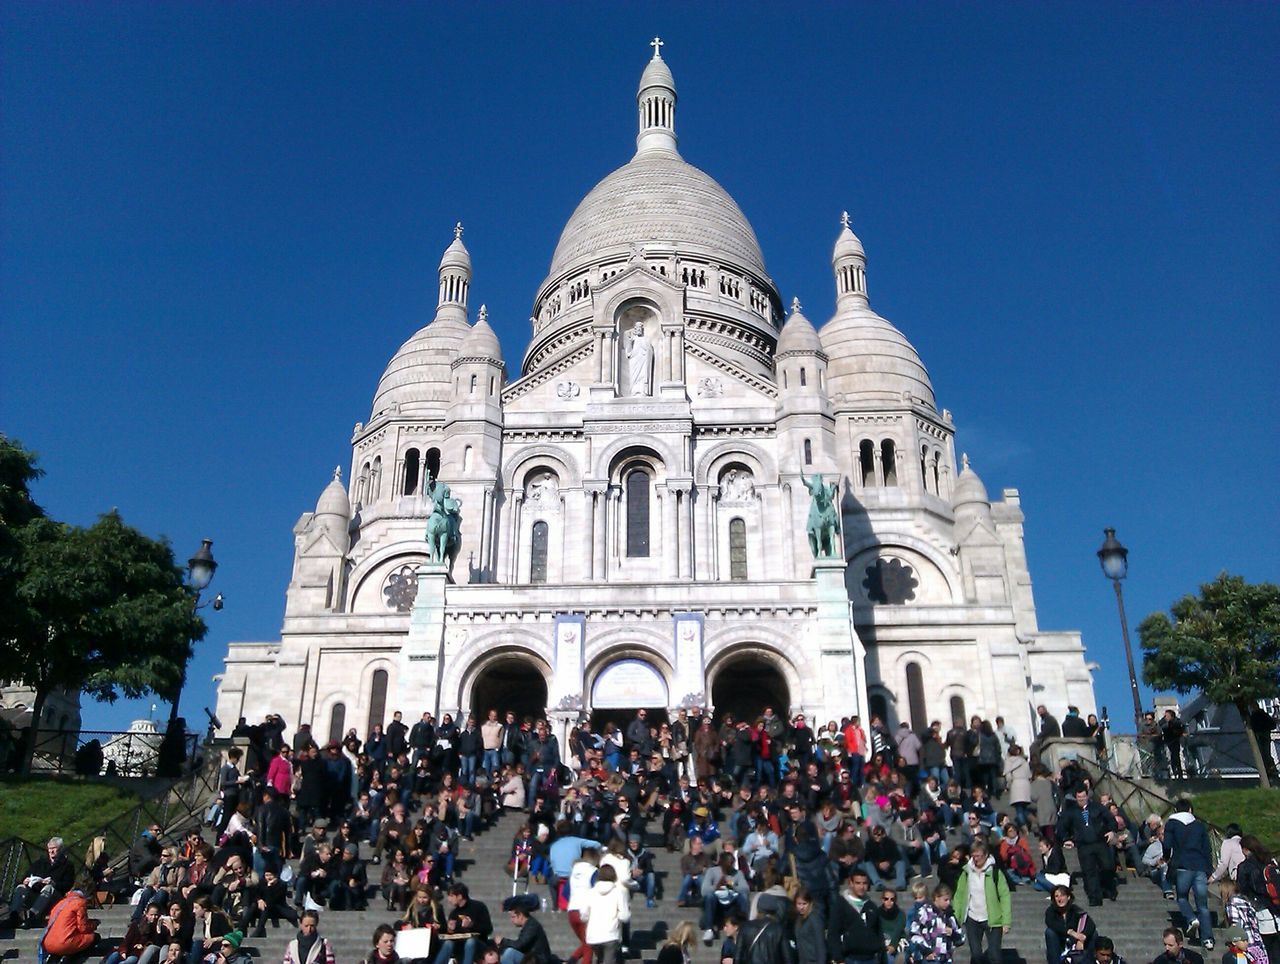 large group of people, religion, place of worship, architecture, spirituality, famous place, tourism, built structure, travel destinations, building exterior, tourist, person, international landmark, travel, men, church, dome, clear sky